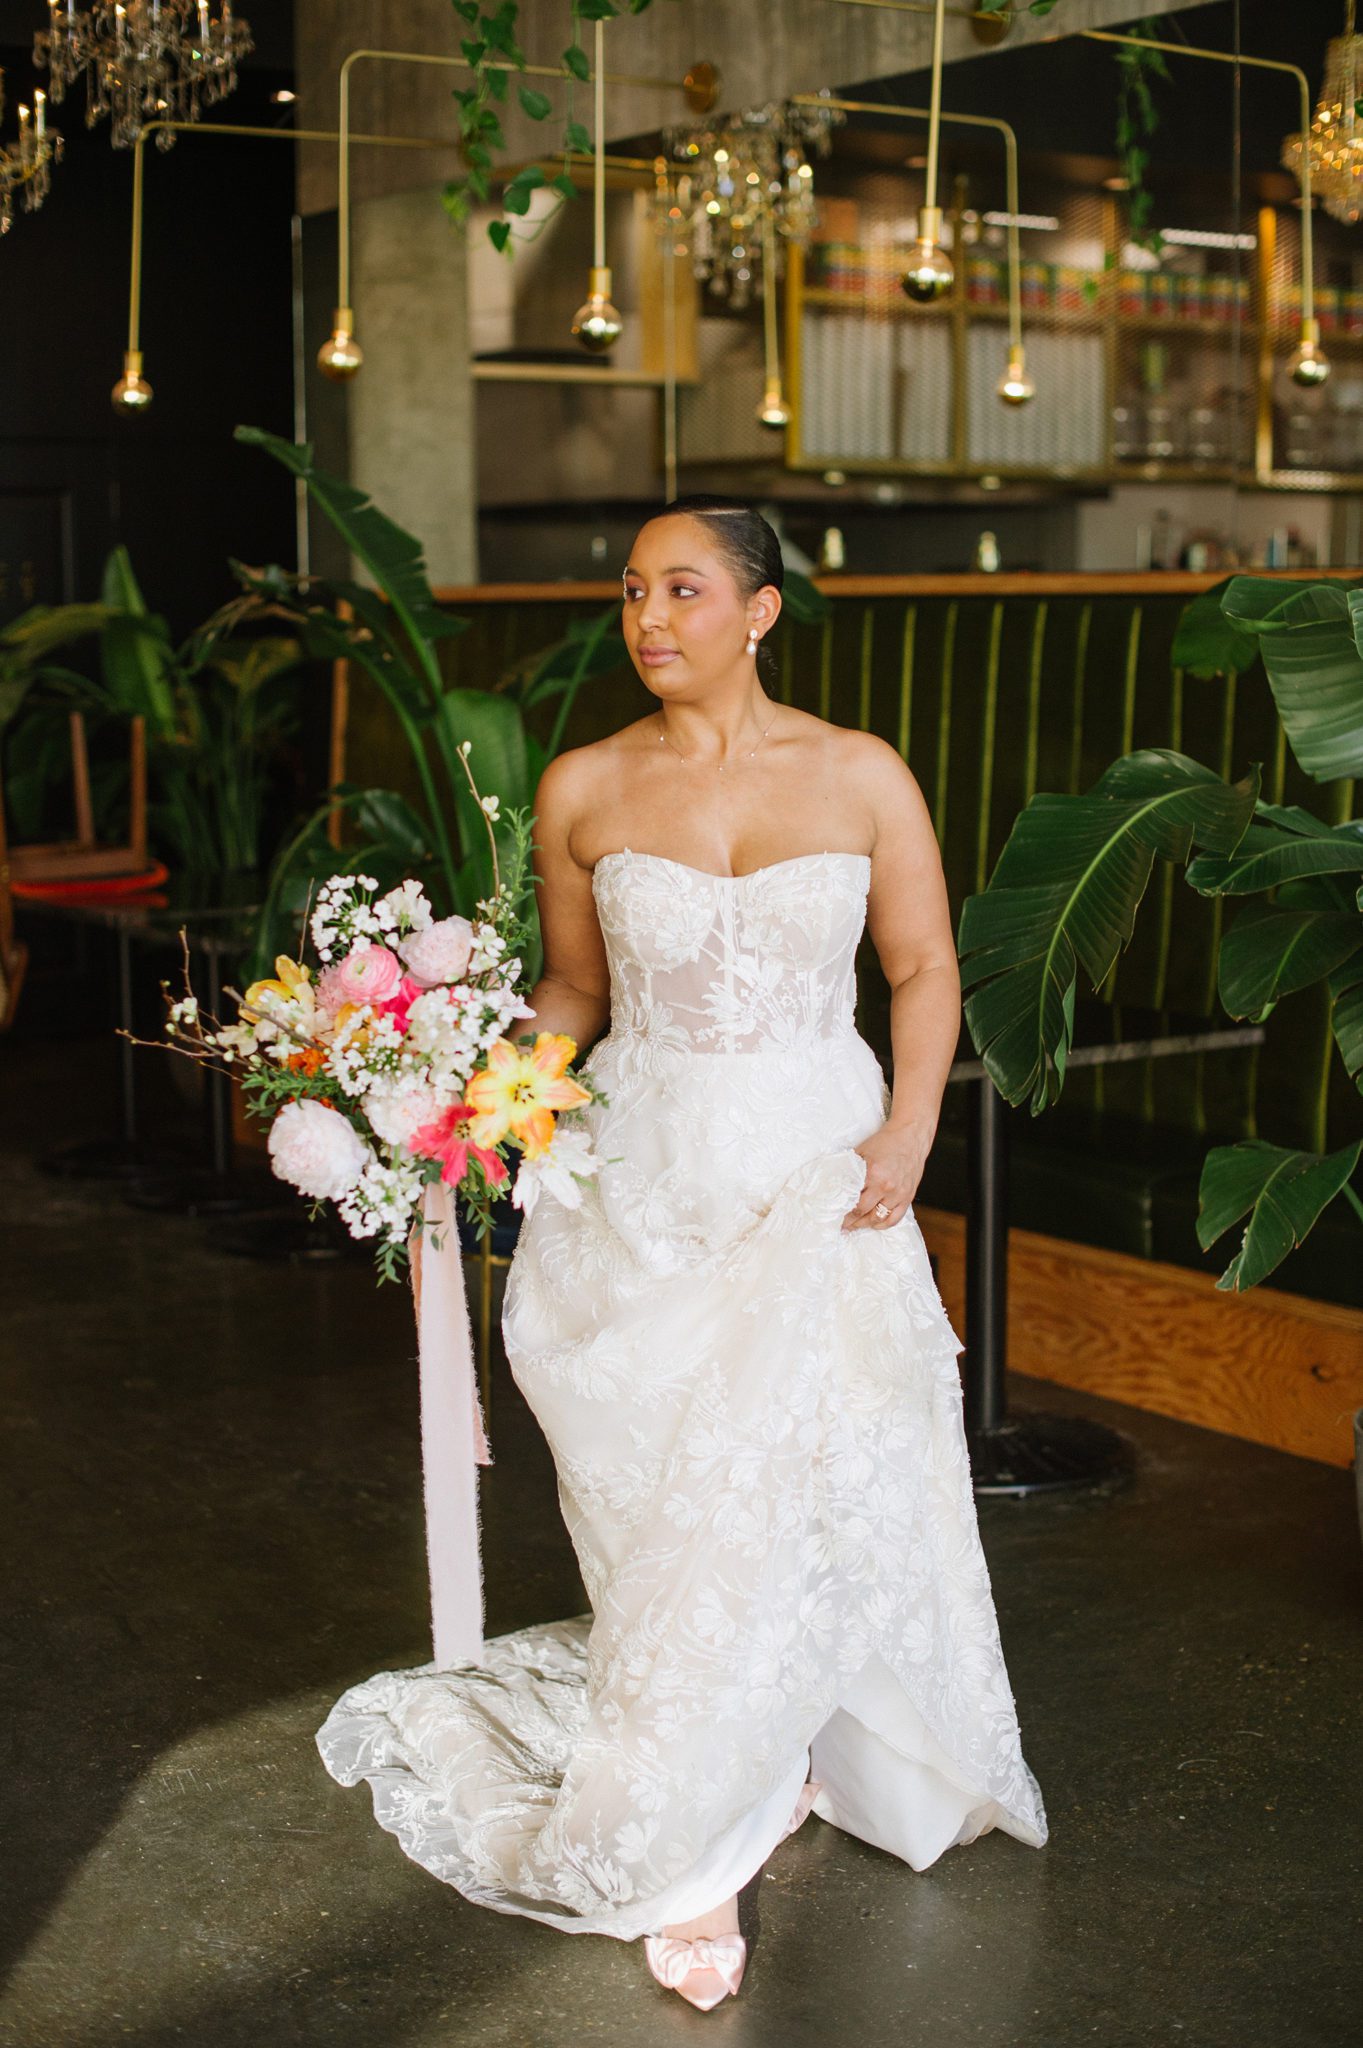 Bridal style for an indoor wedding ceremony with tropical inspiration